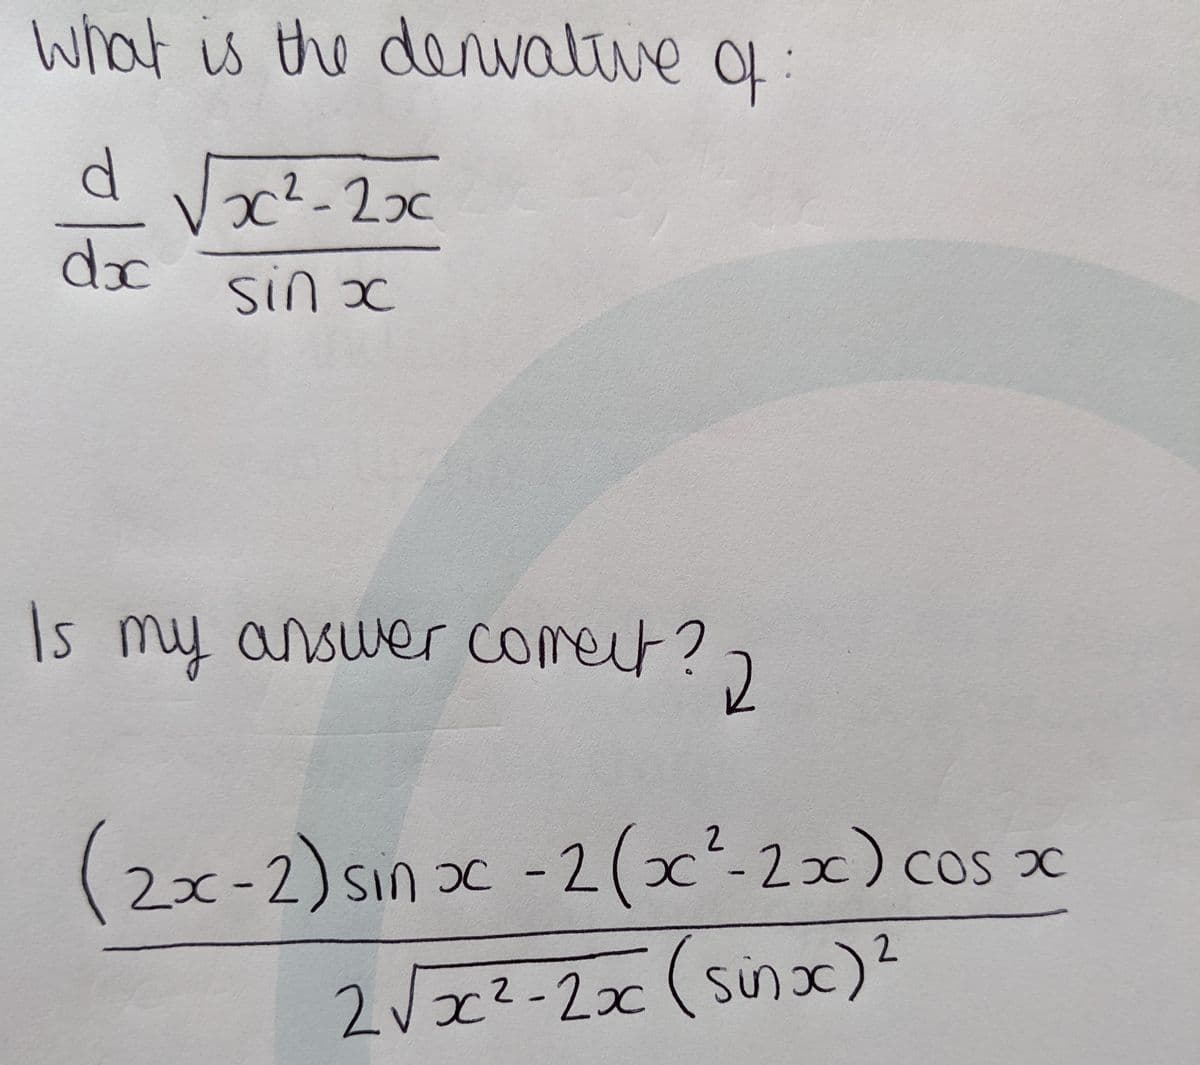 What is the denvative of:
x² - 2x
sin x
Is my answer coment? 2
(2x-2) sin x -2(x²-2x) cos x
2√x²-2x (sinx) ²
018